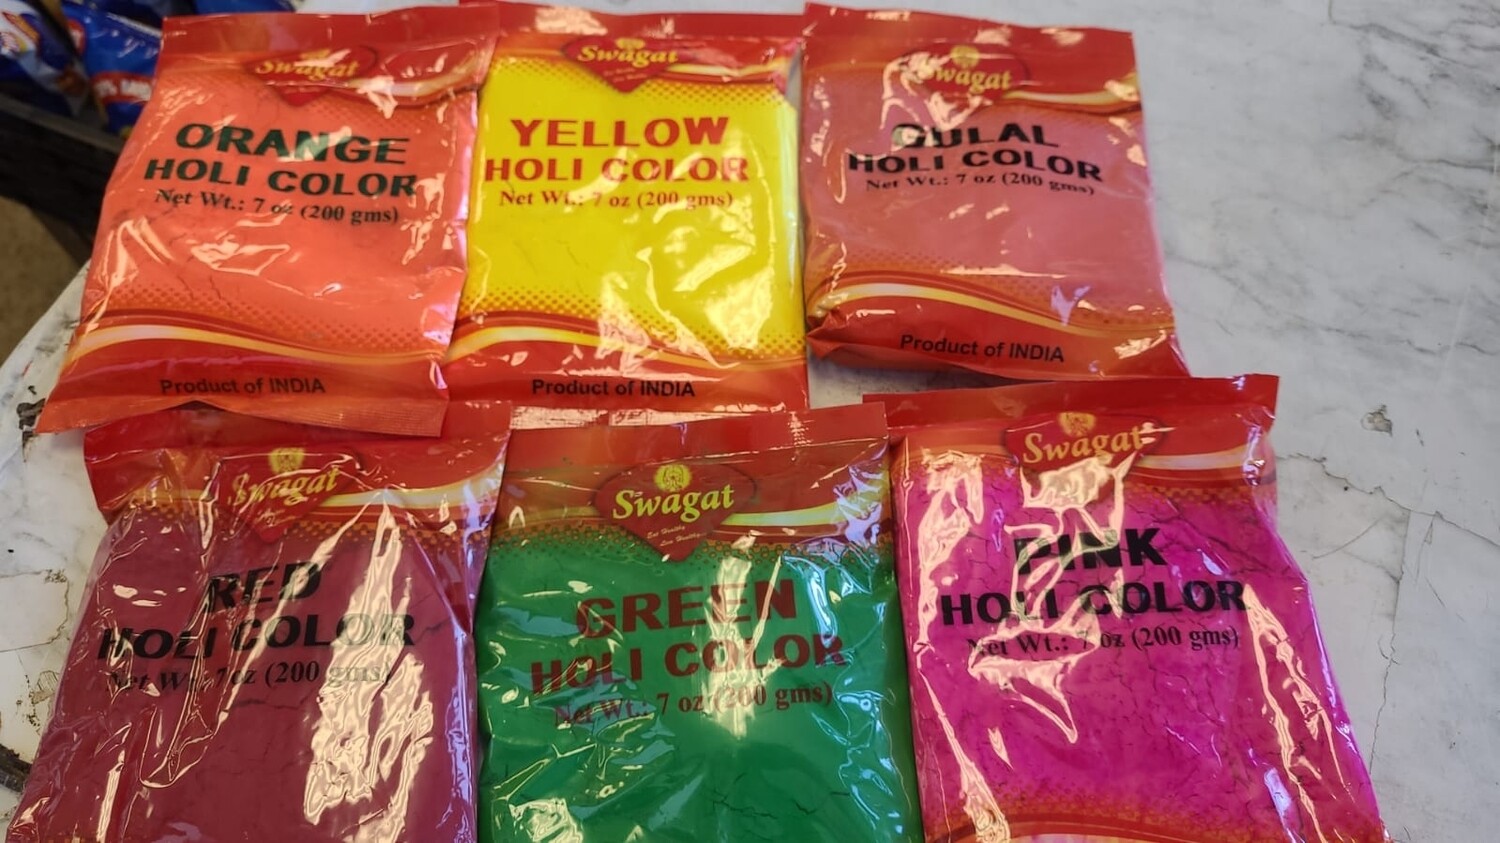 Swagat Holi Color Yellow 200gm